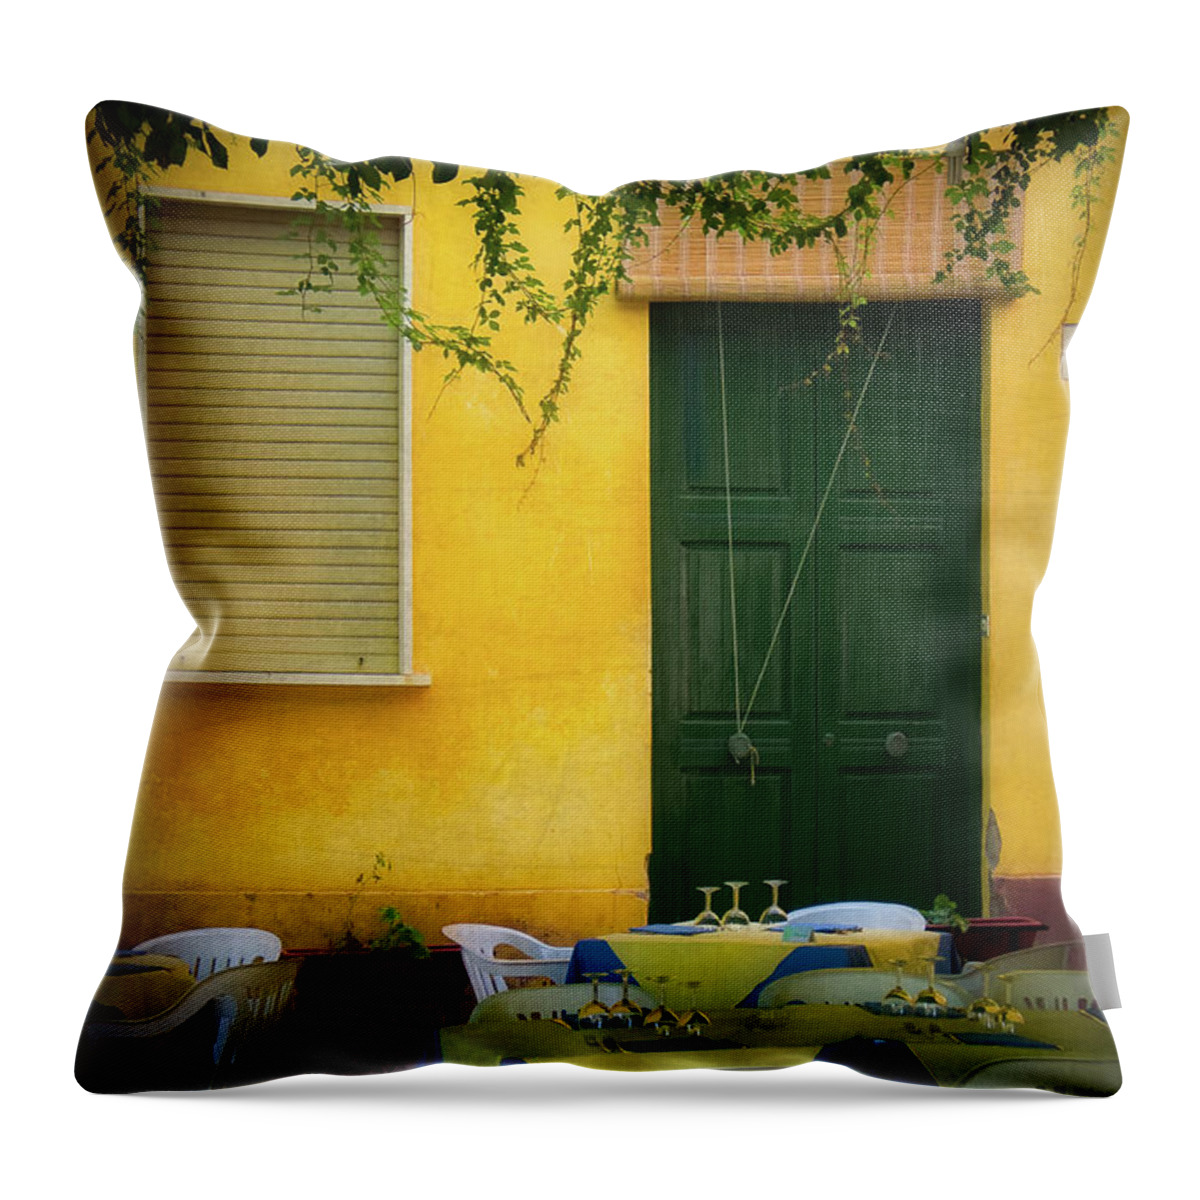 Ventotene Throw Pillow featuring the photograph Ventotene Cafe by Doug Sturgess